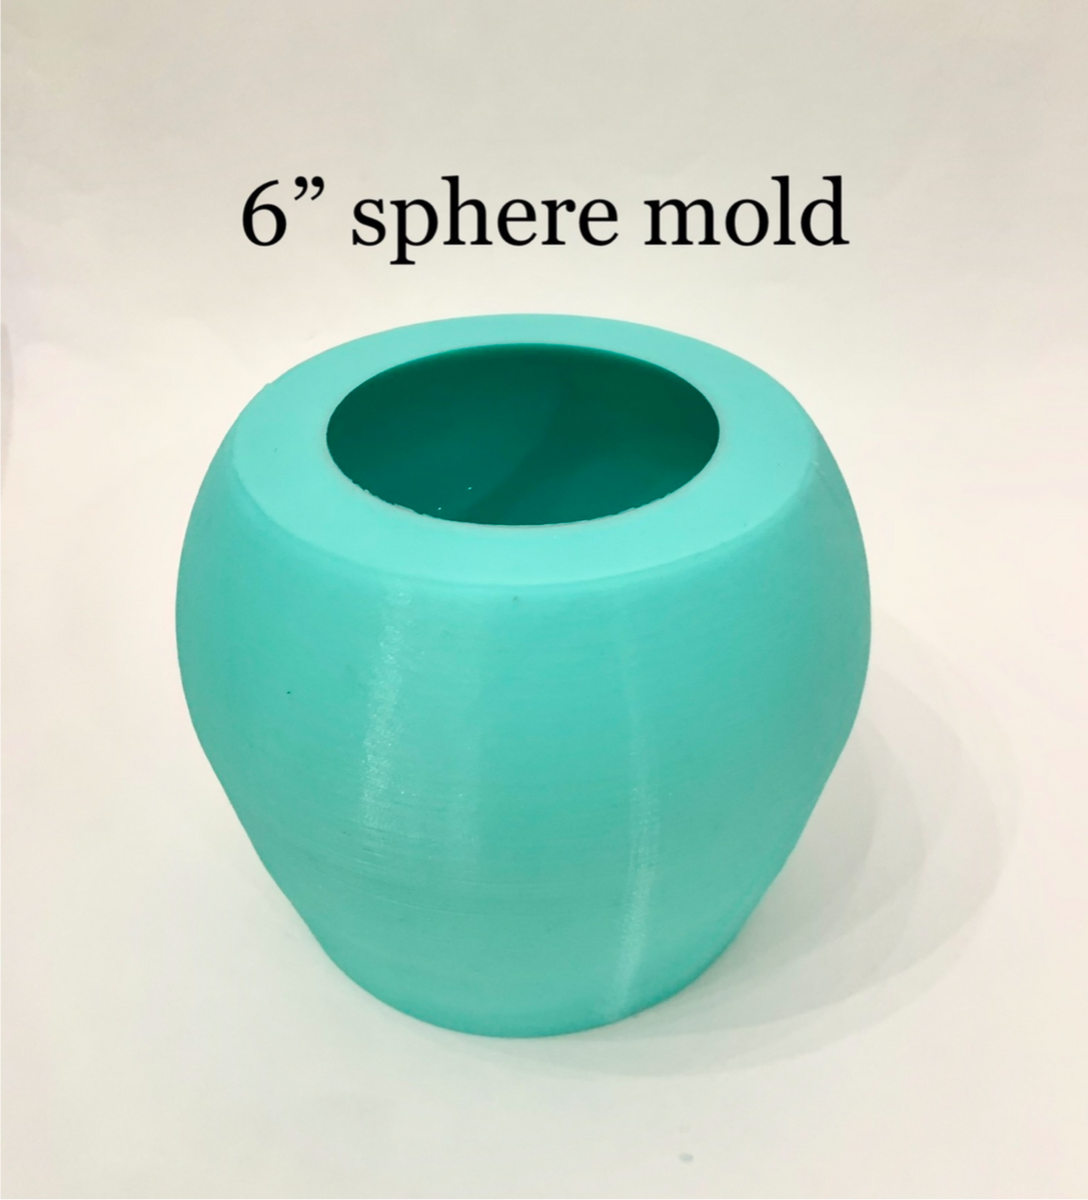 6 JUMBO Sphere Mold // Silicone Mold for Resin Casting // Smooth and Shiny  Mold 